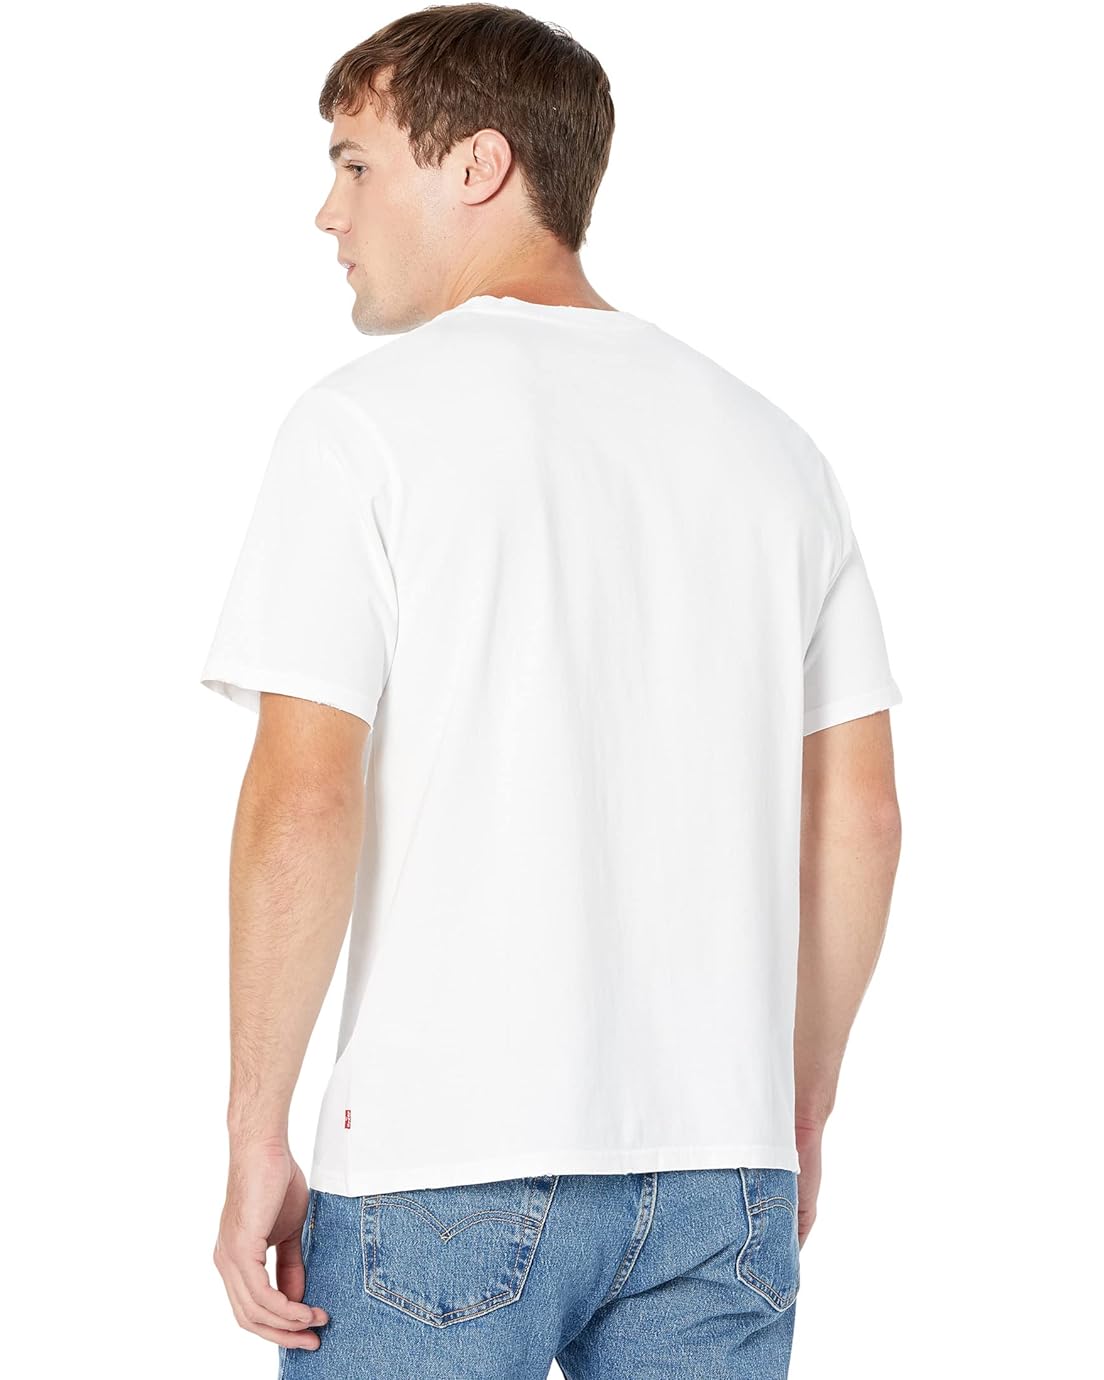  Levis Premium Short Sleeve Relaxed Fit Tee